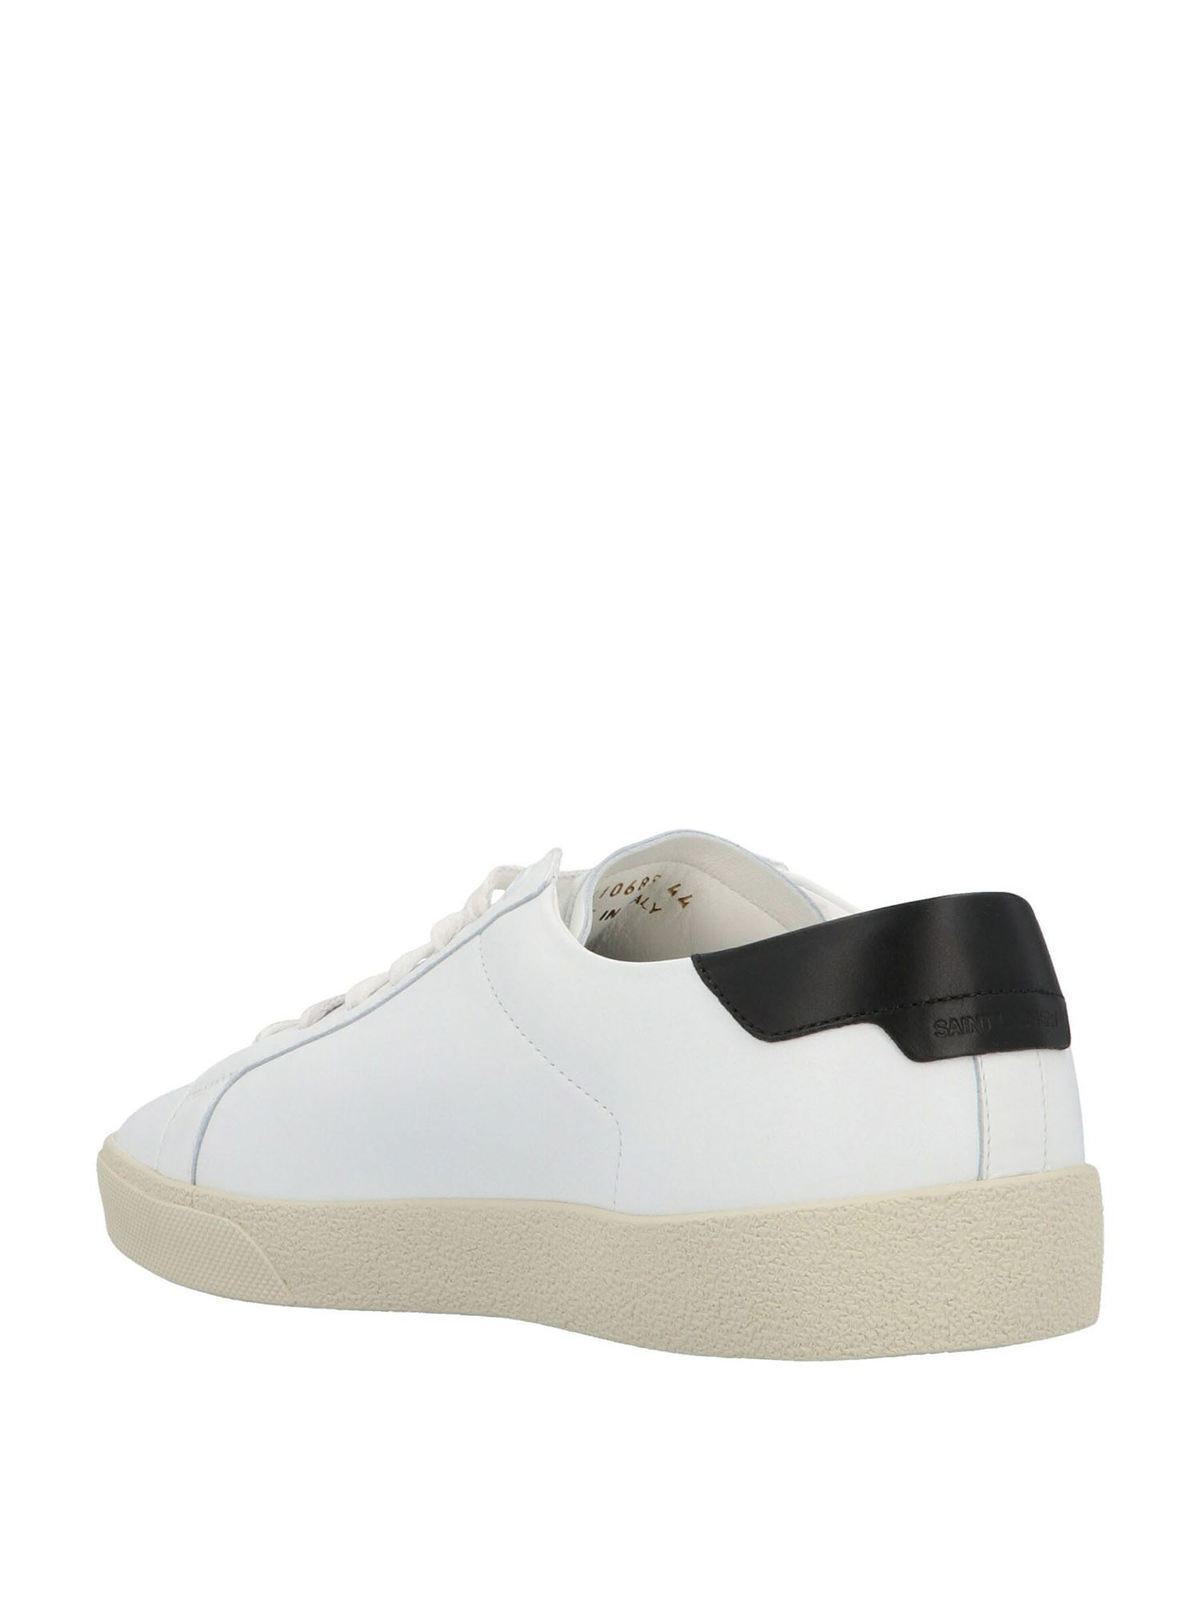 ysl court classic sneakers